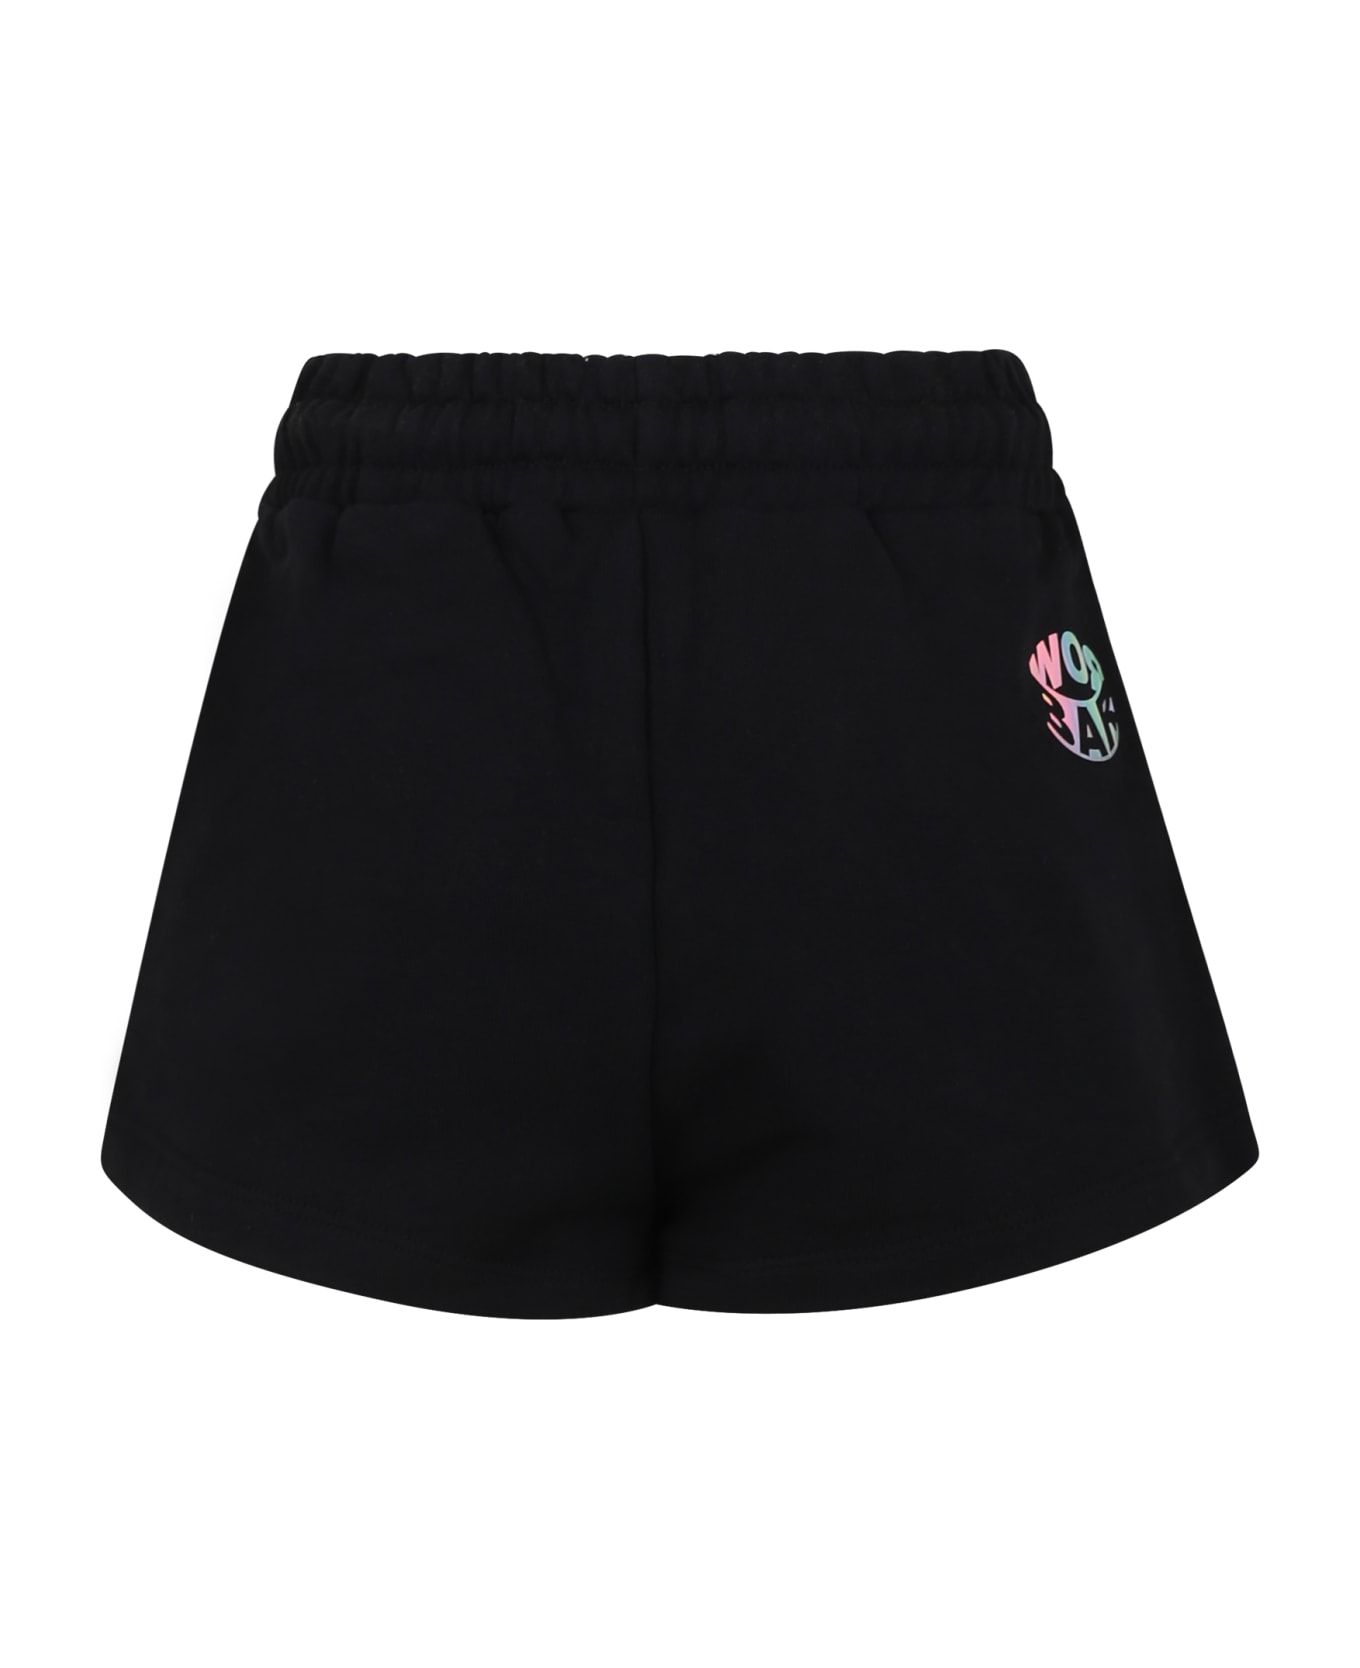 Barrow Black Shorts For Girl With Smiley Faces - Nero ボトムス